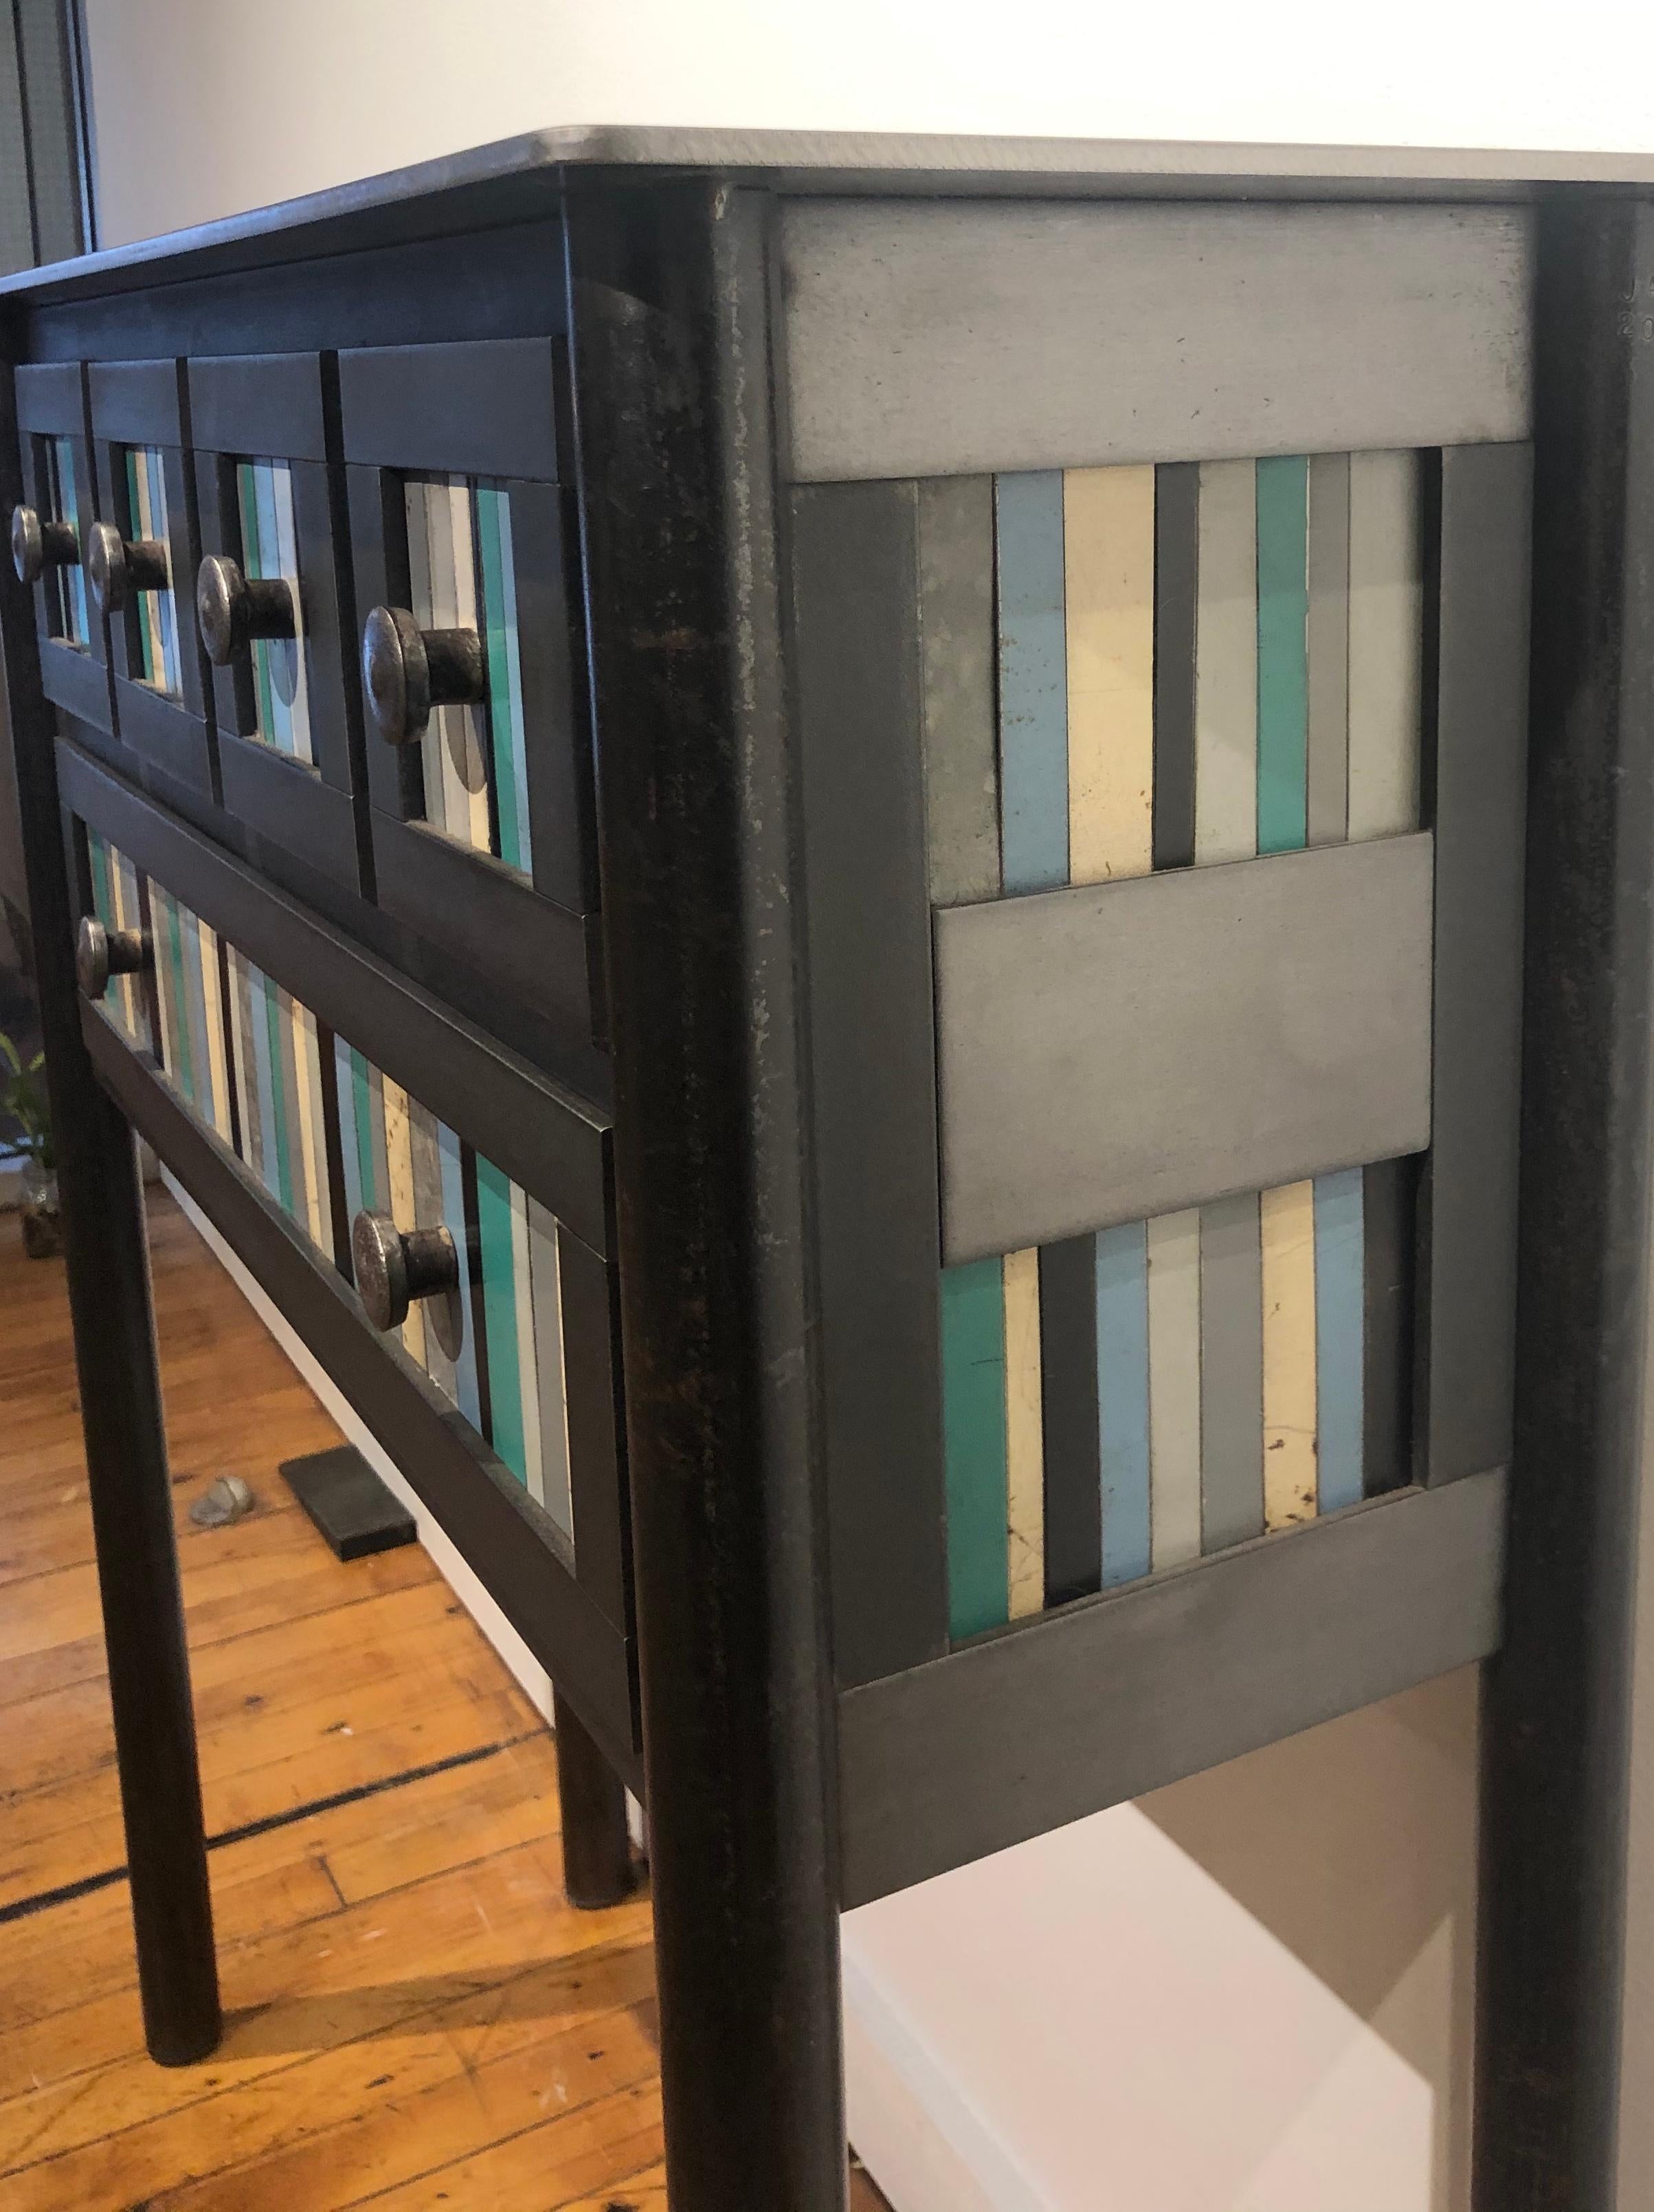 This modern 5-drawer table is made from hot roll blue steel with the front panel design based on the Gees Bend Quilts. Each panel is unique with the use of galvanized rusted steel that is salvaged. Its rich grey, blue and green tones enhance the